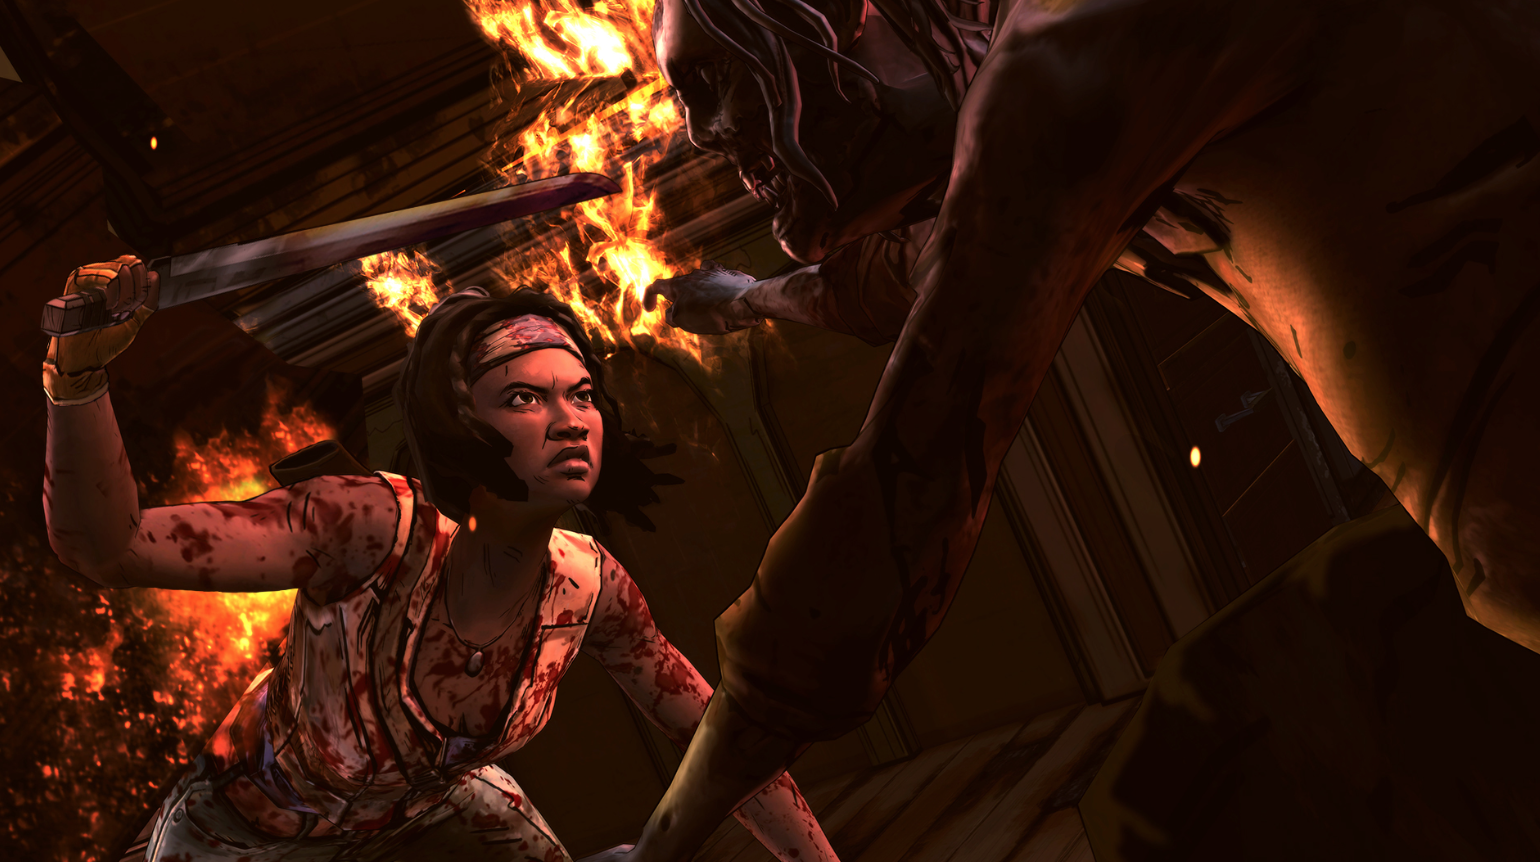 Michonne ep 3 What We Deserve review images #1